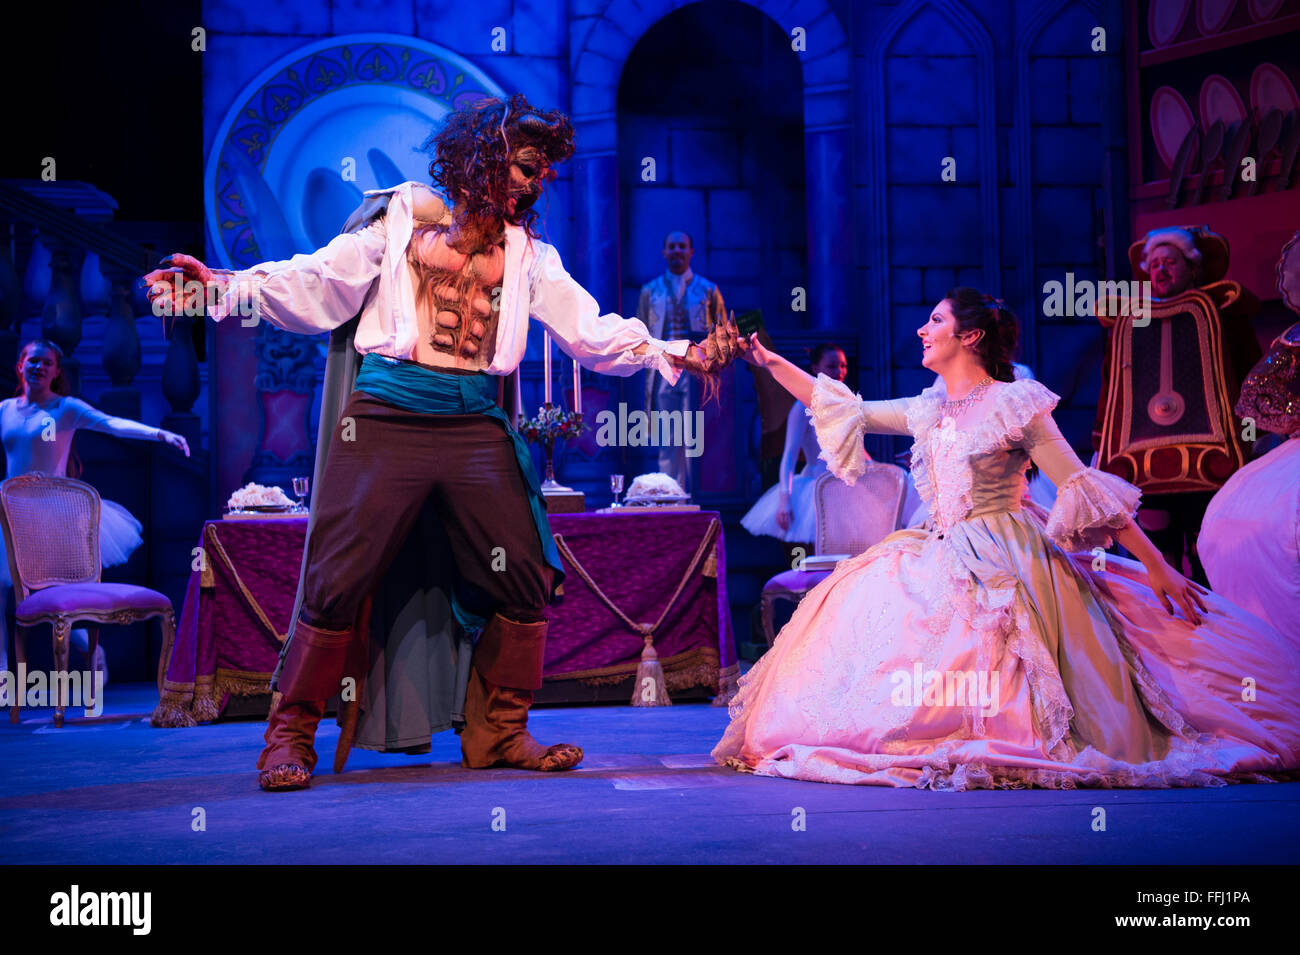 Amateur Drama - non-professional actors performing in a pantomime production Beauty and the Beast on stage at Aberystwyth Arts Centre, Wales UK Stock Photo image